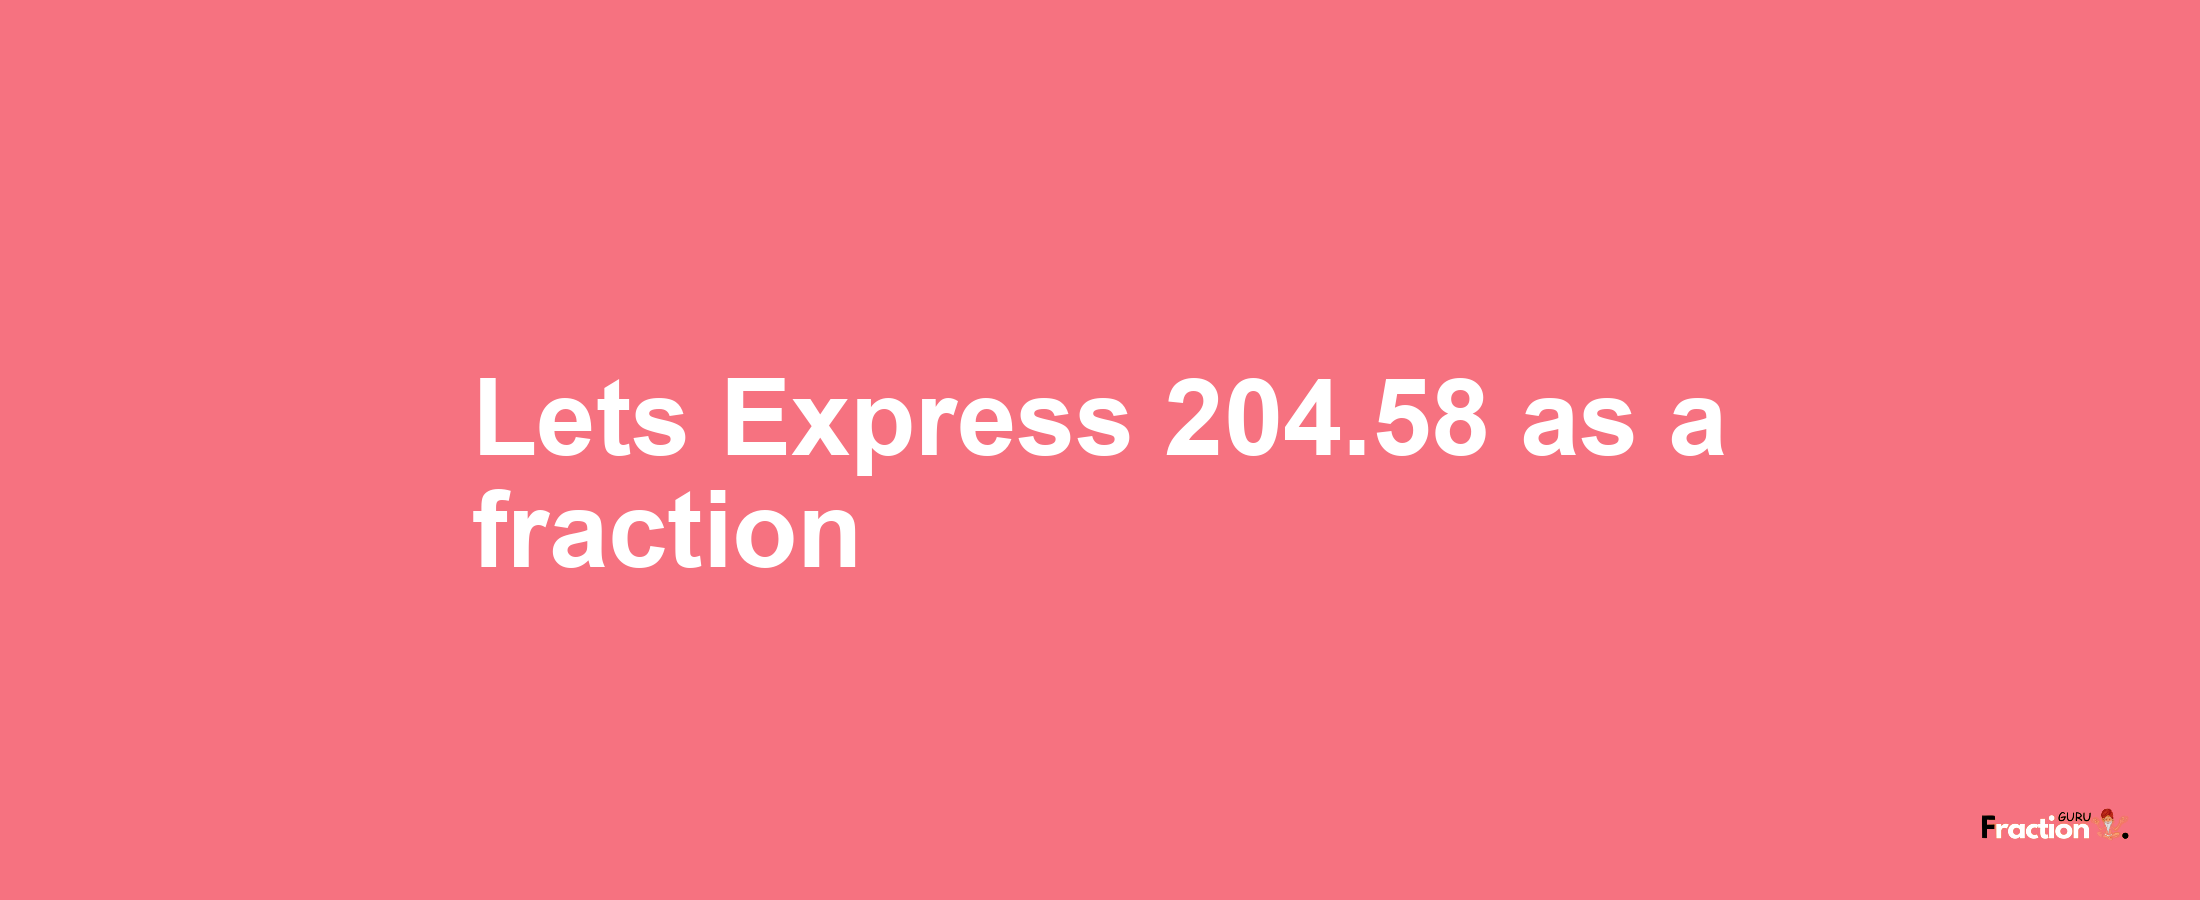 Lets Express 204.58 as afraction